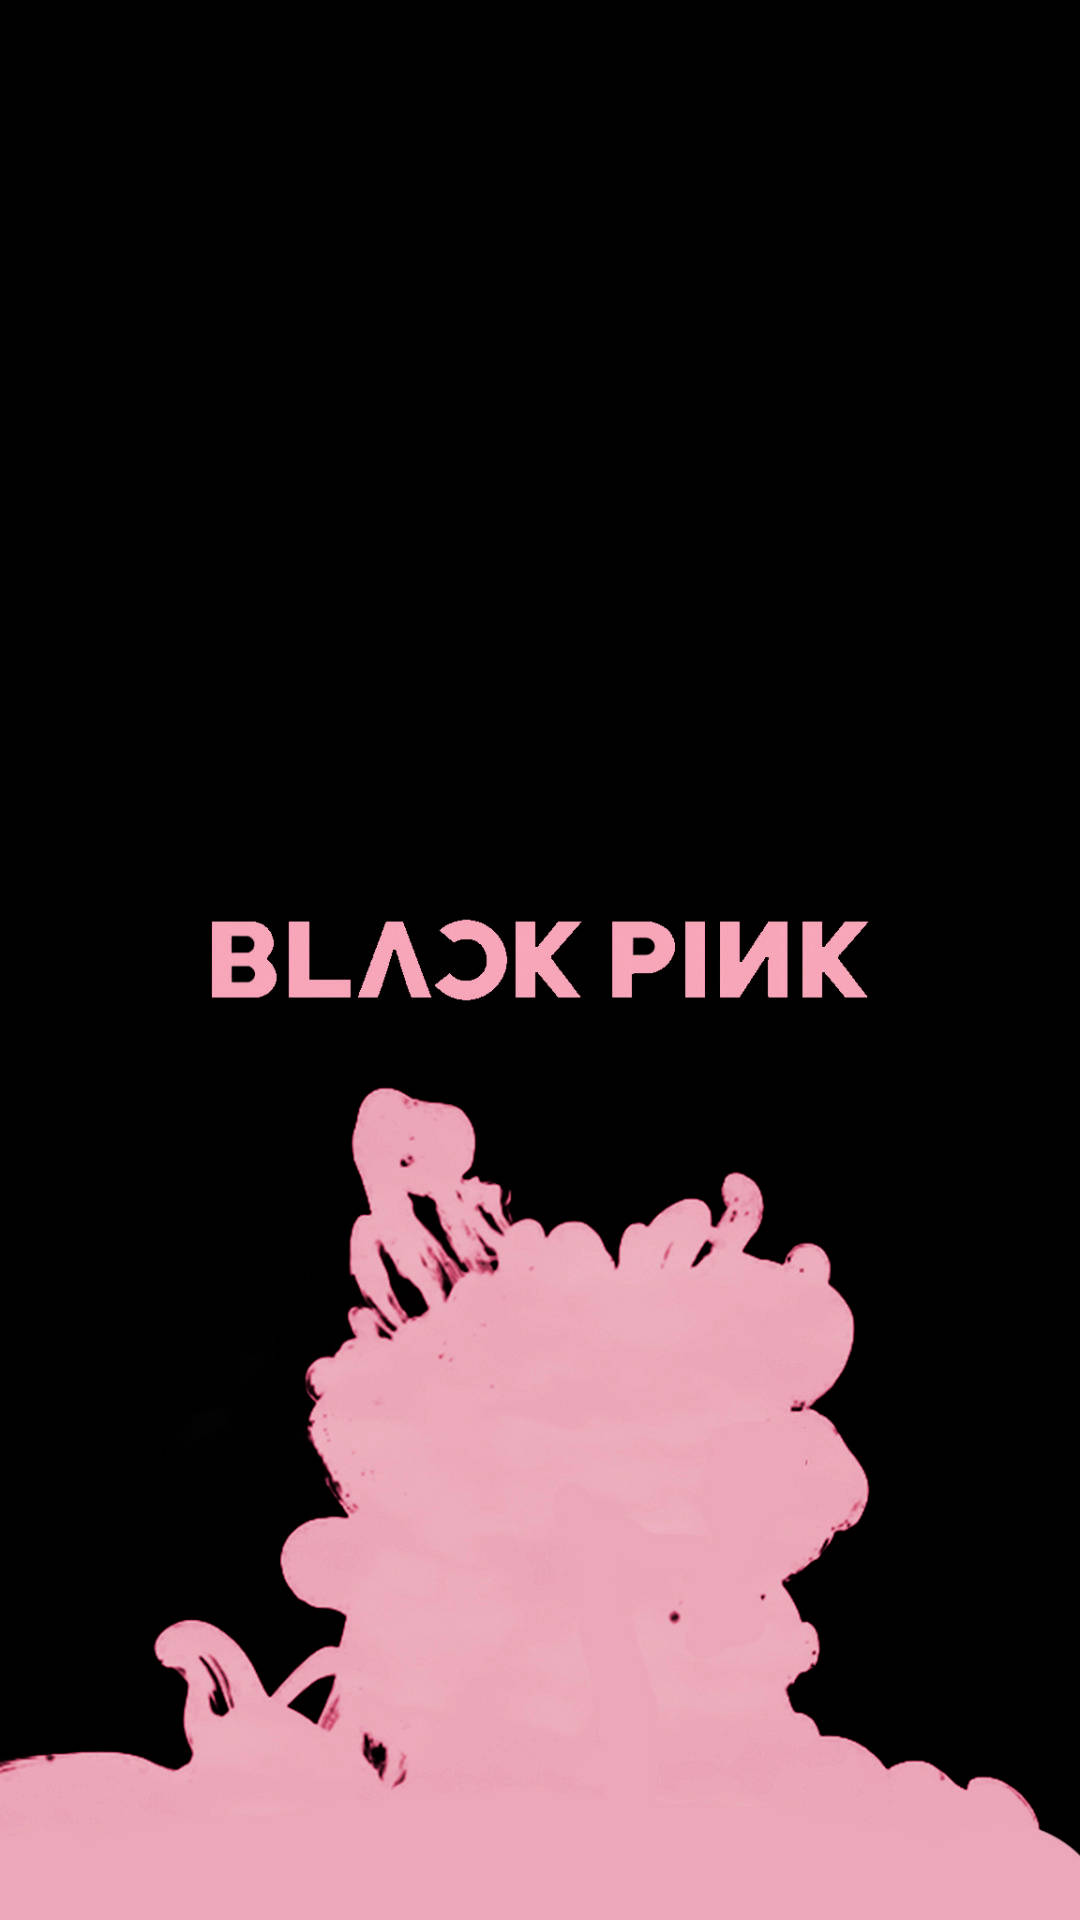 Blackpink 1080X1920 Wallpaper and Background Image